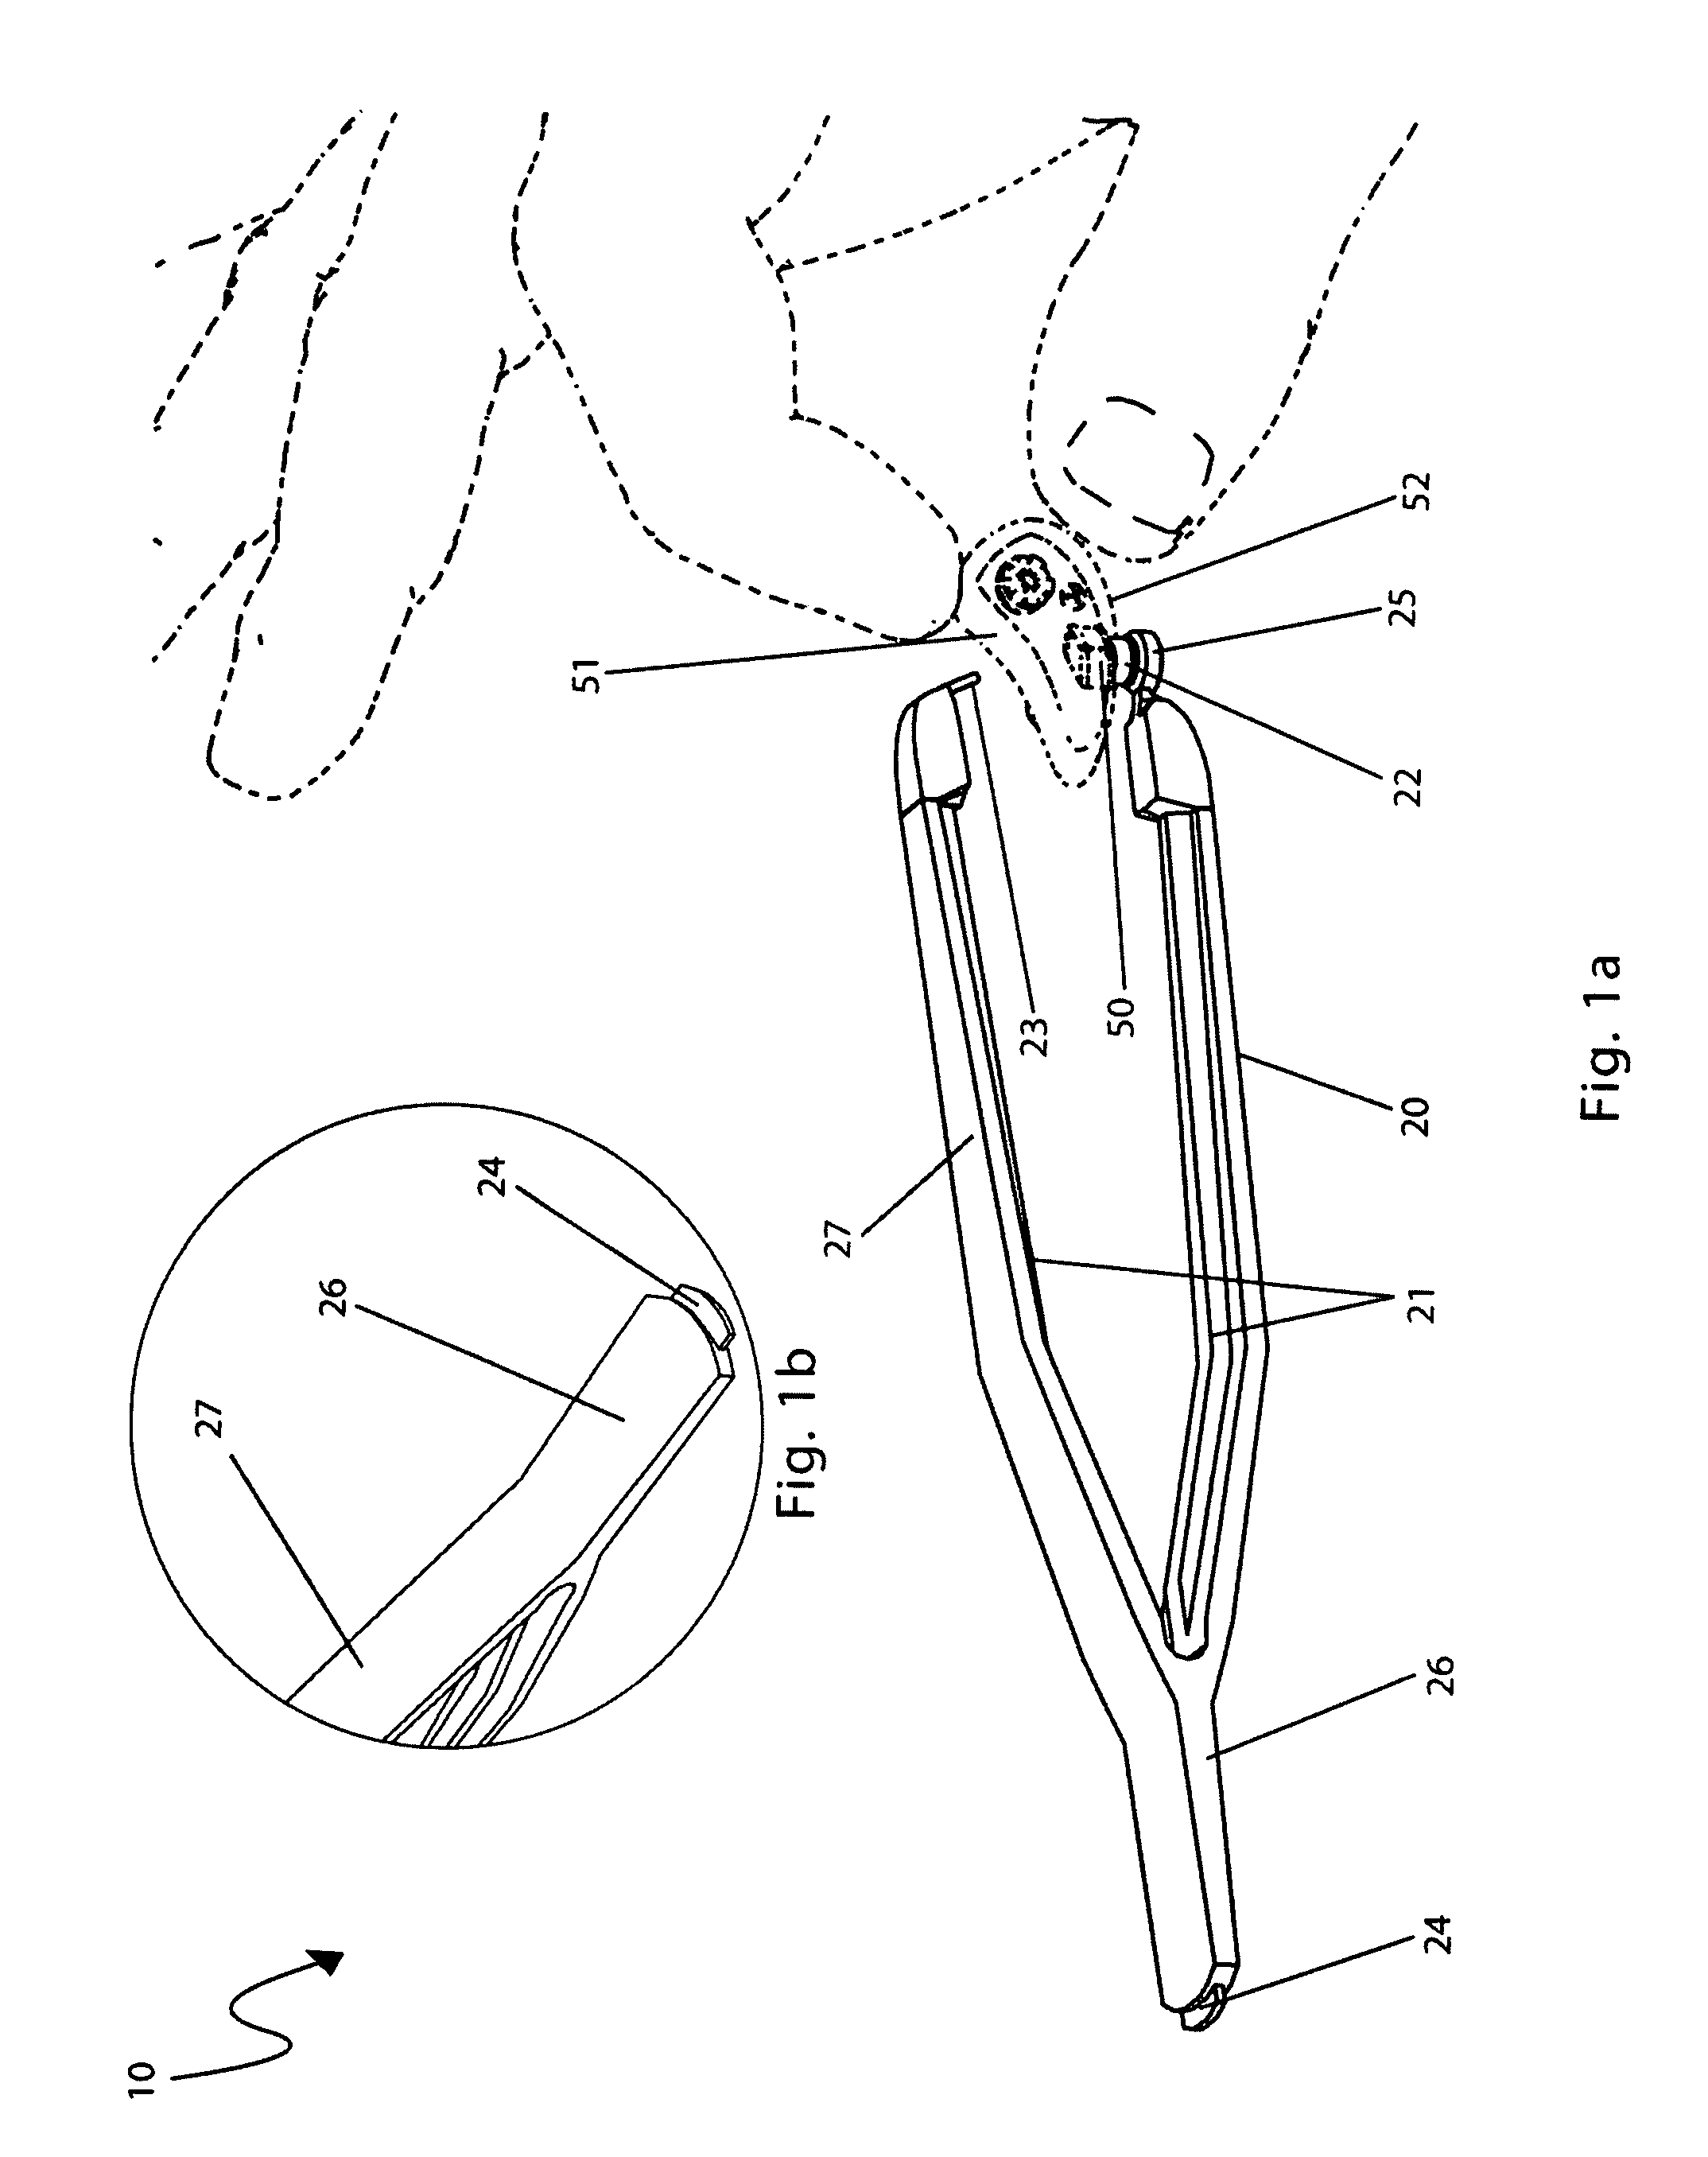 Hearing aid battery removal tool and associated method